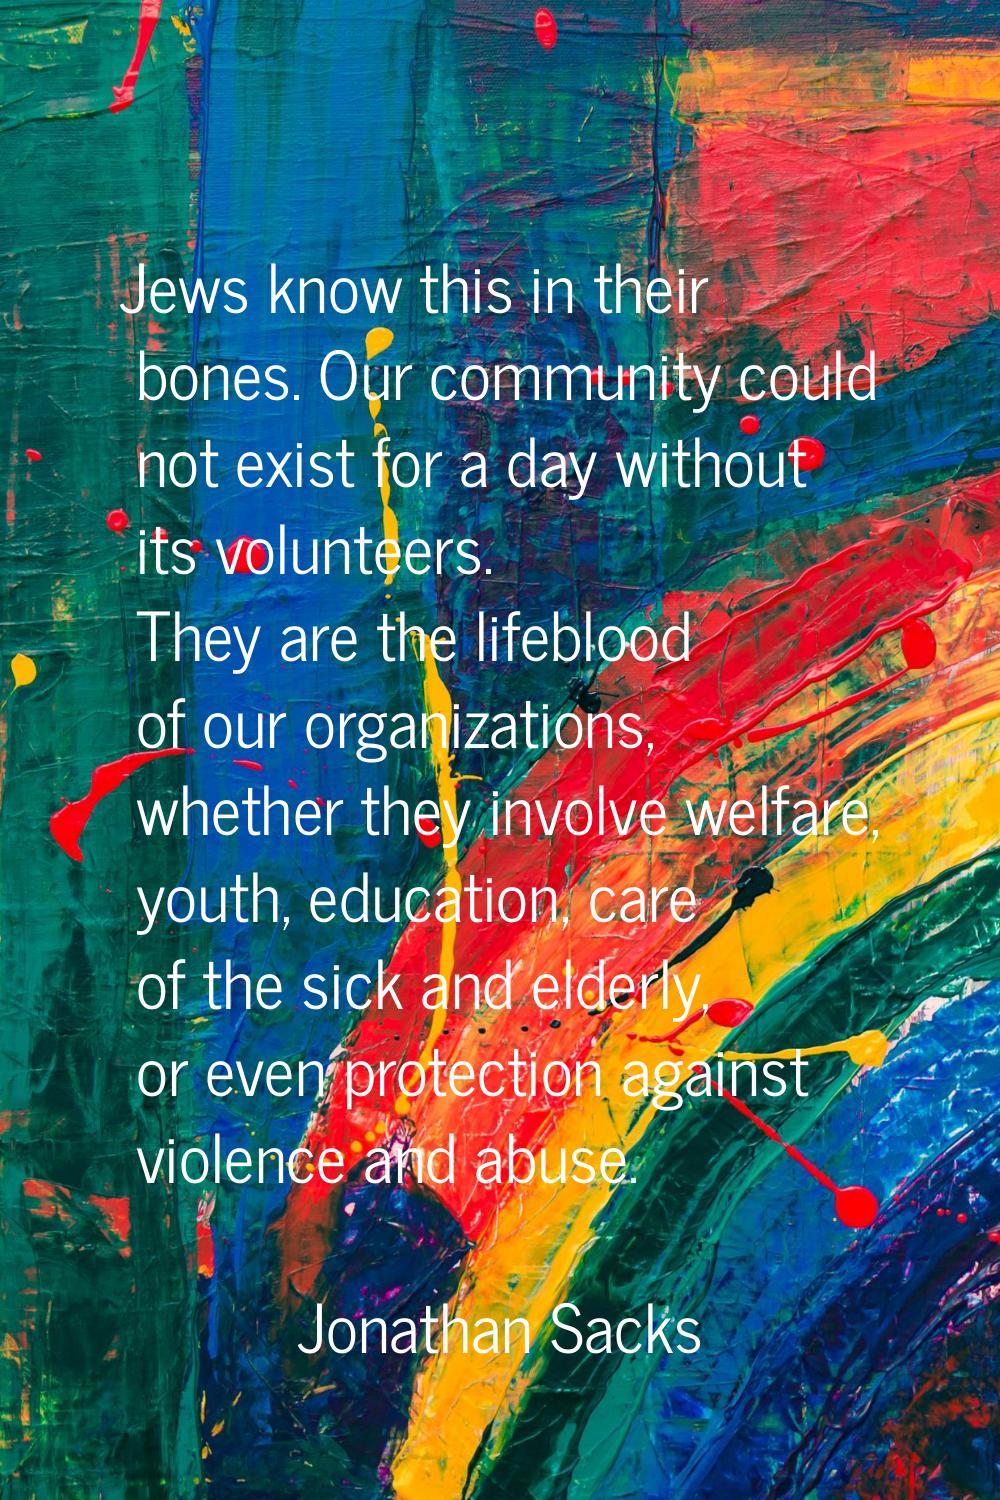 Jews know this in their bones. Our community could not exist for a day without its volunteers. They